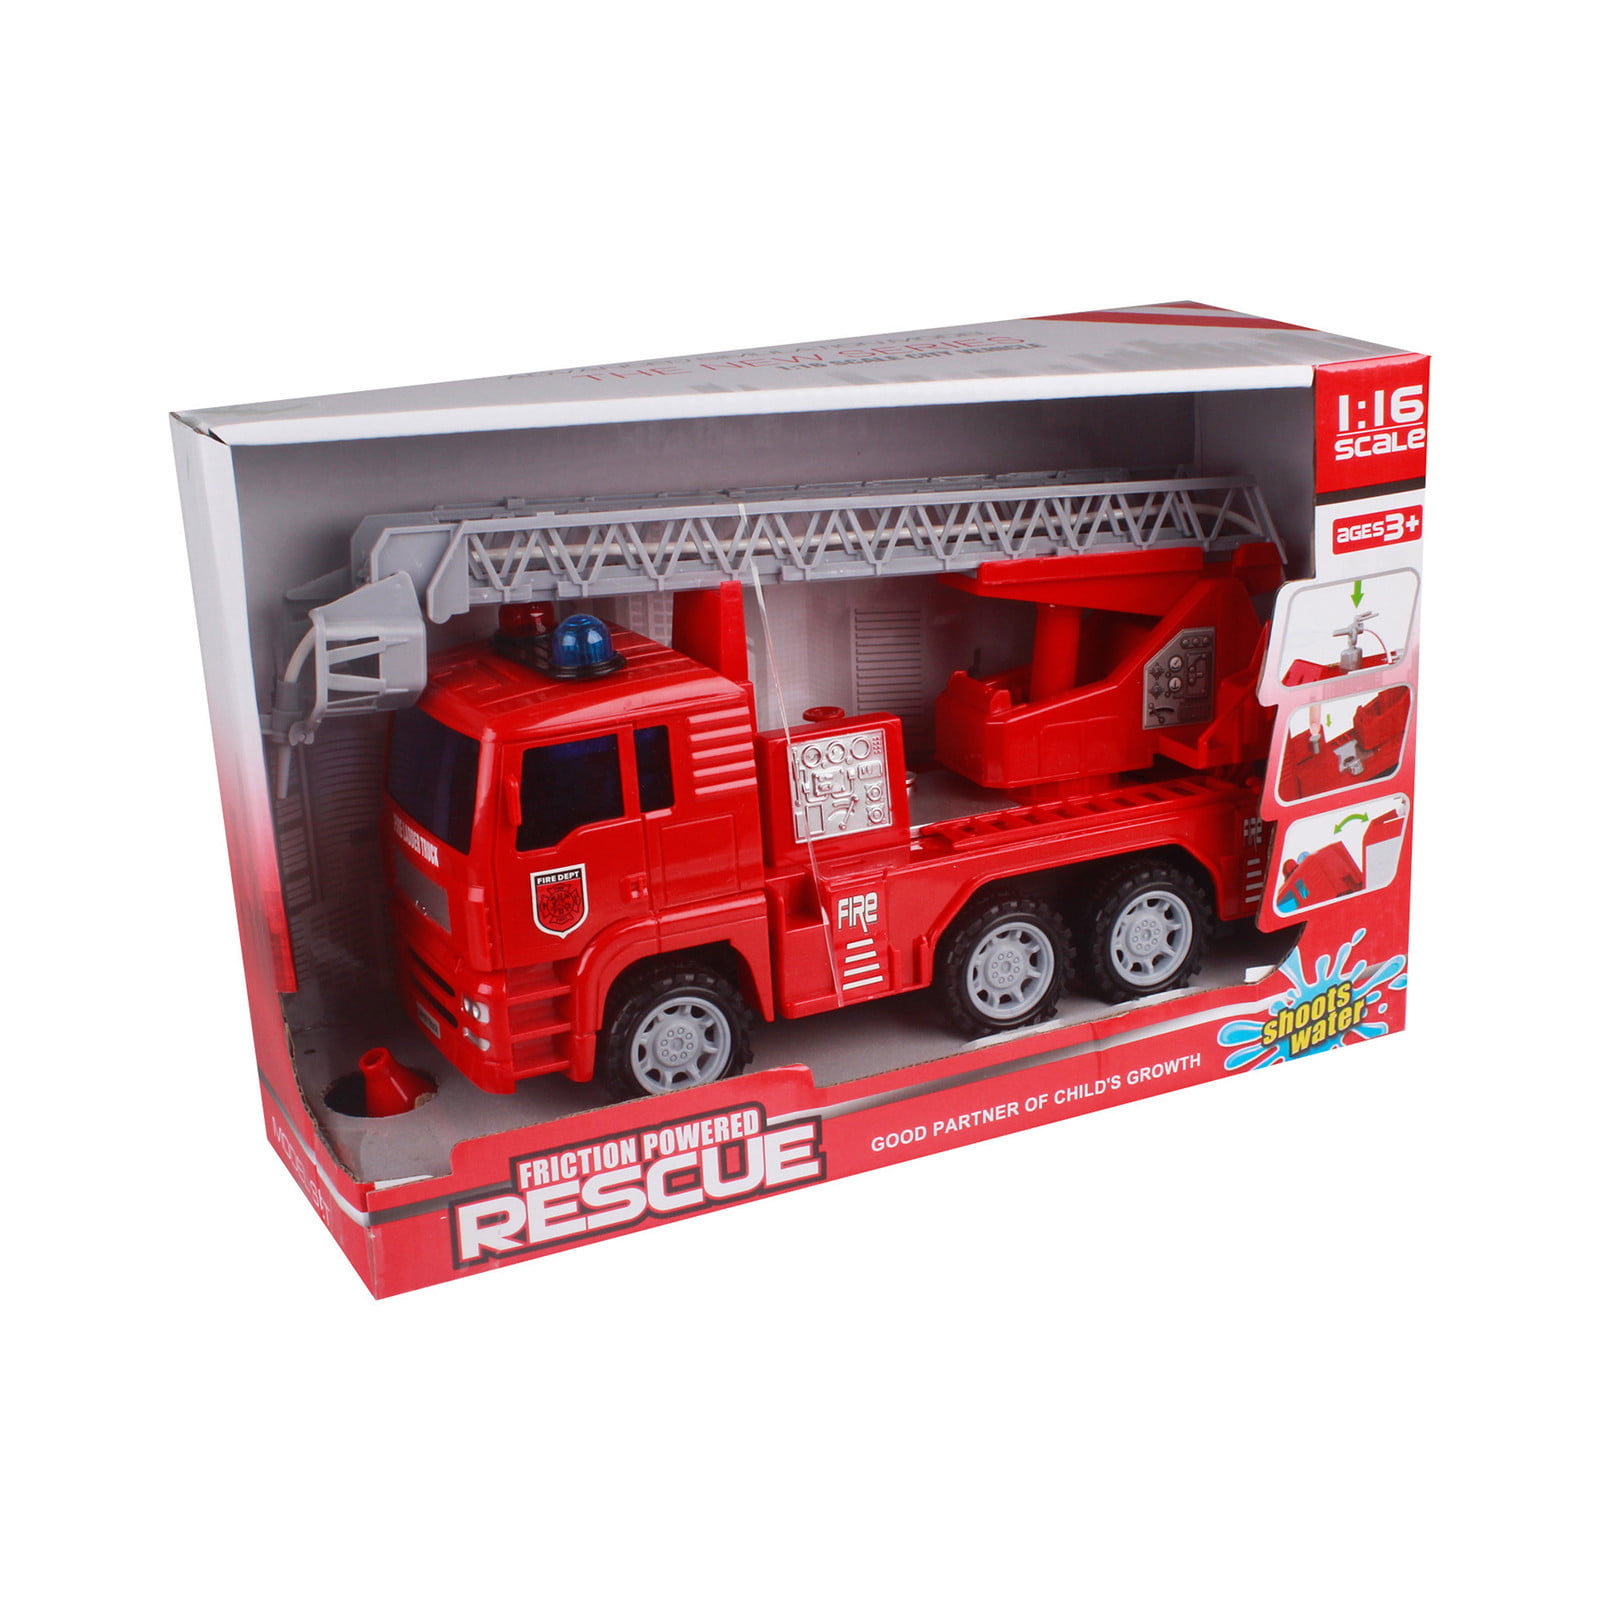 Cars Red Fire Truck Firetruck Big Wheel Coolle- Kids Big Fire Truck Toy Fire Trucks for Boys Kids Children 2+ Years Old Made of Quality Material 